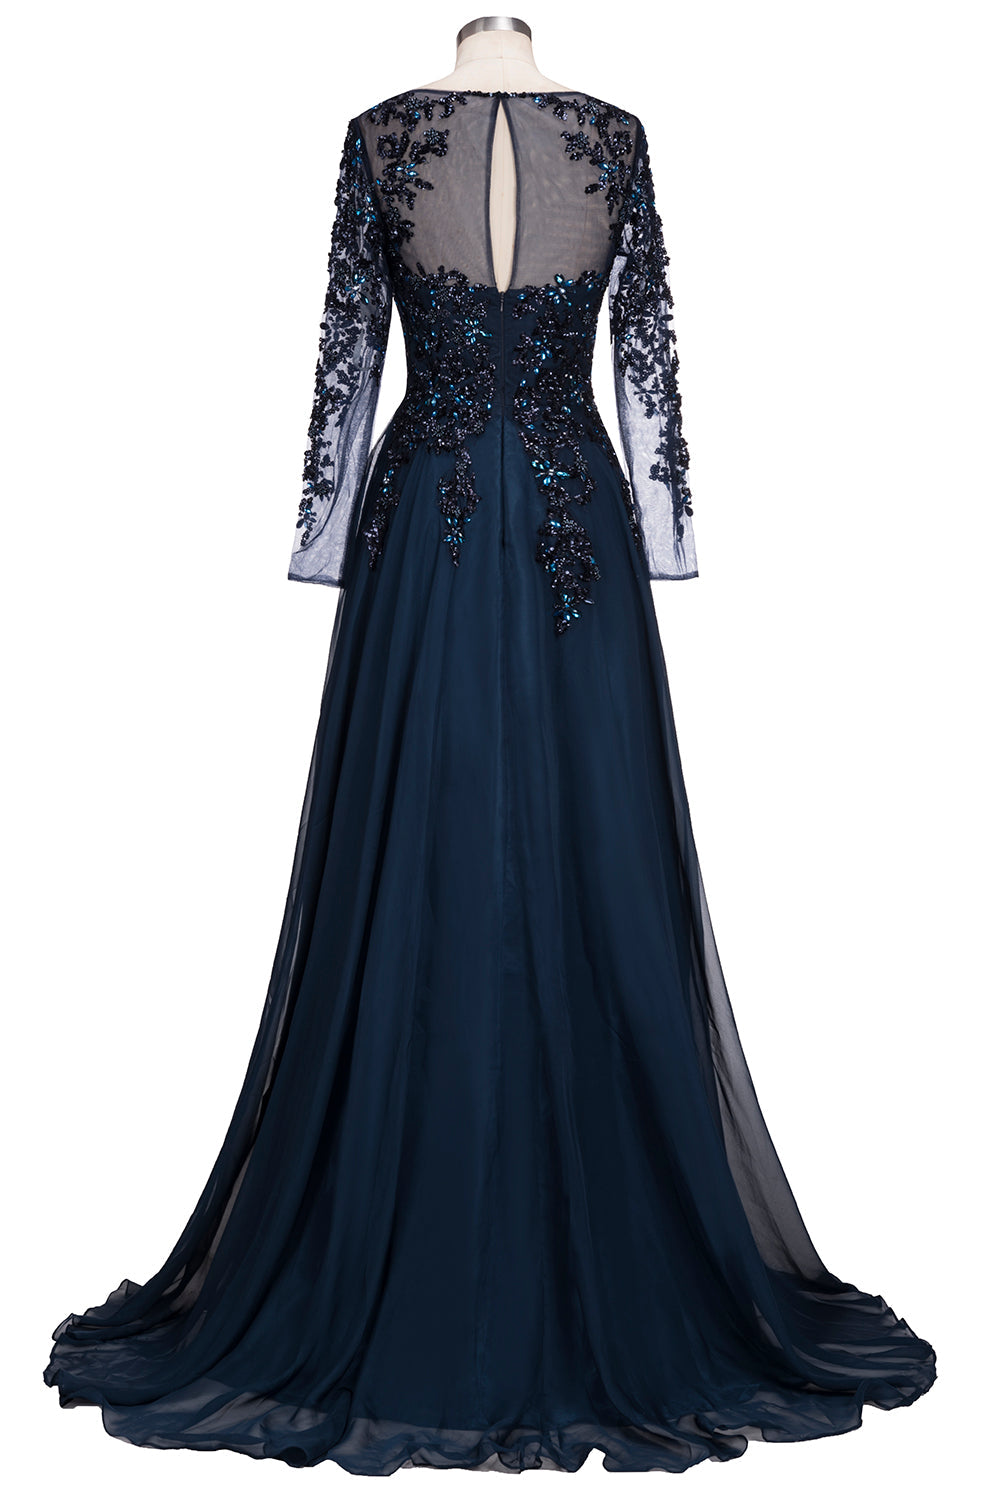 Dark Navy Long A-line Jewel Tulle Formal Evening Dresses with Sleeves-BIZTUNNEL